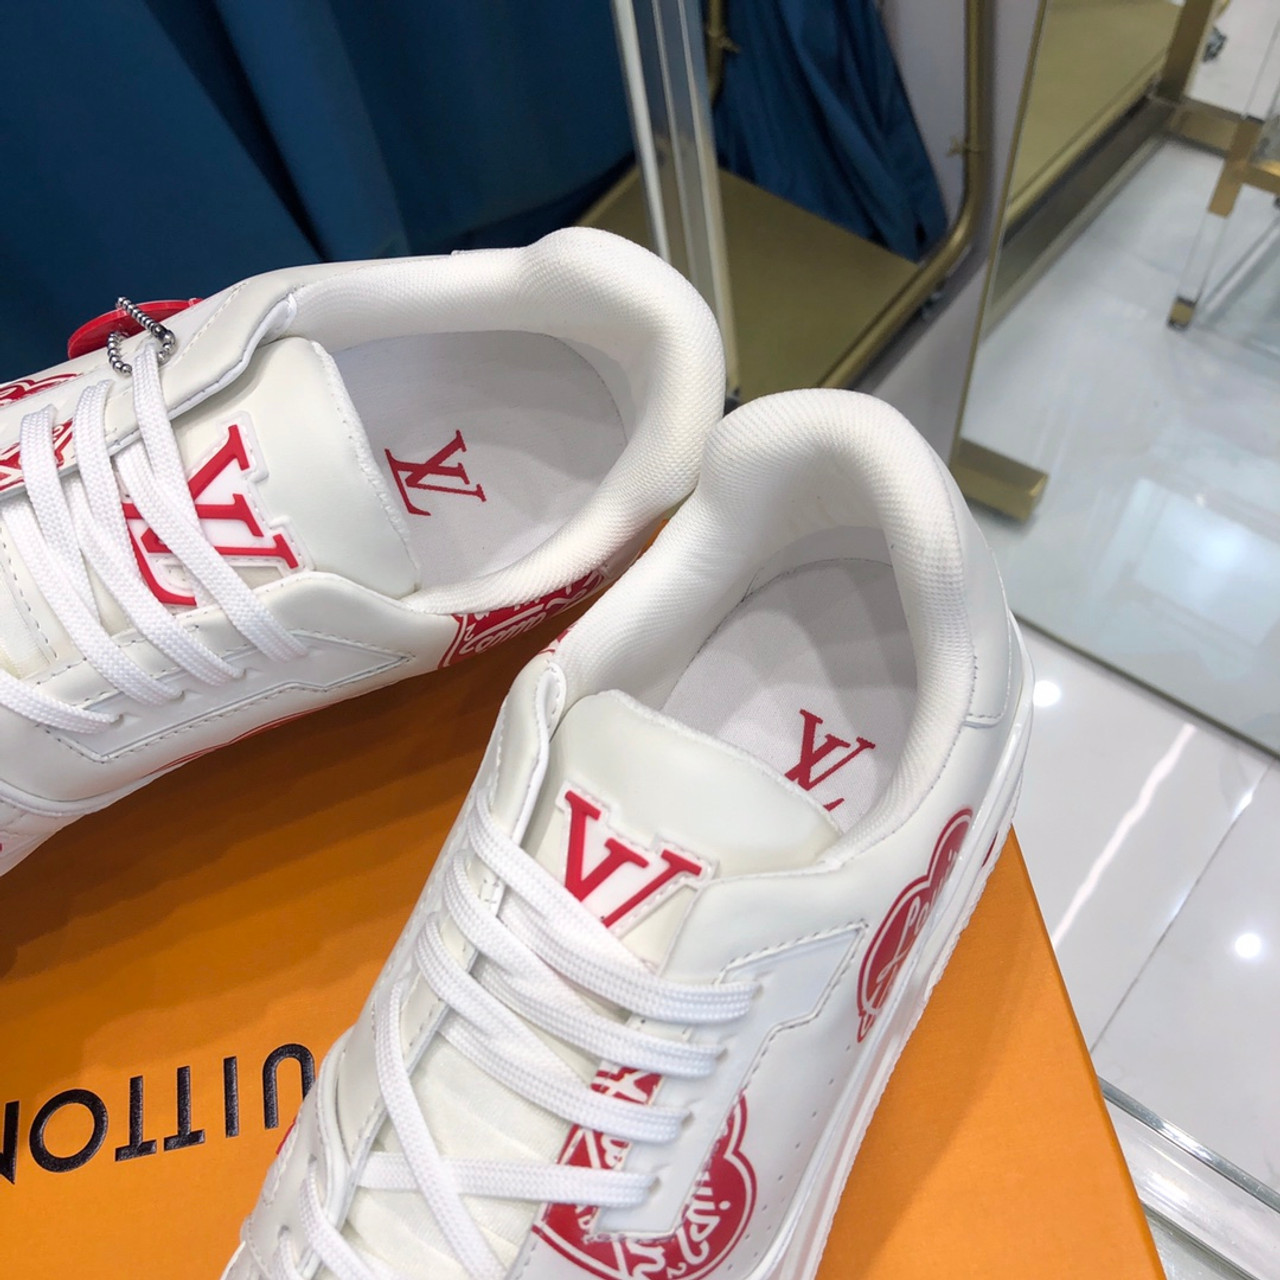 Hi I'm Ceci,provide Top Grade quality 1:1 replica LV sneakers .We have  bags,jewelry,shoes,accessories,clothes,watch.We will send QC pics &  video,if not satisfied,you can unconditional refund or replace. WhatsApp:  +(86)13719385701，Welcome to consul